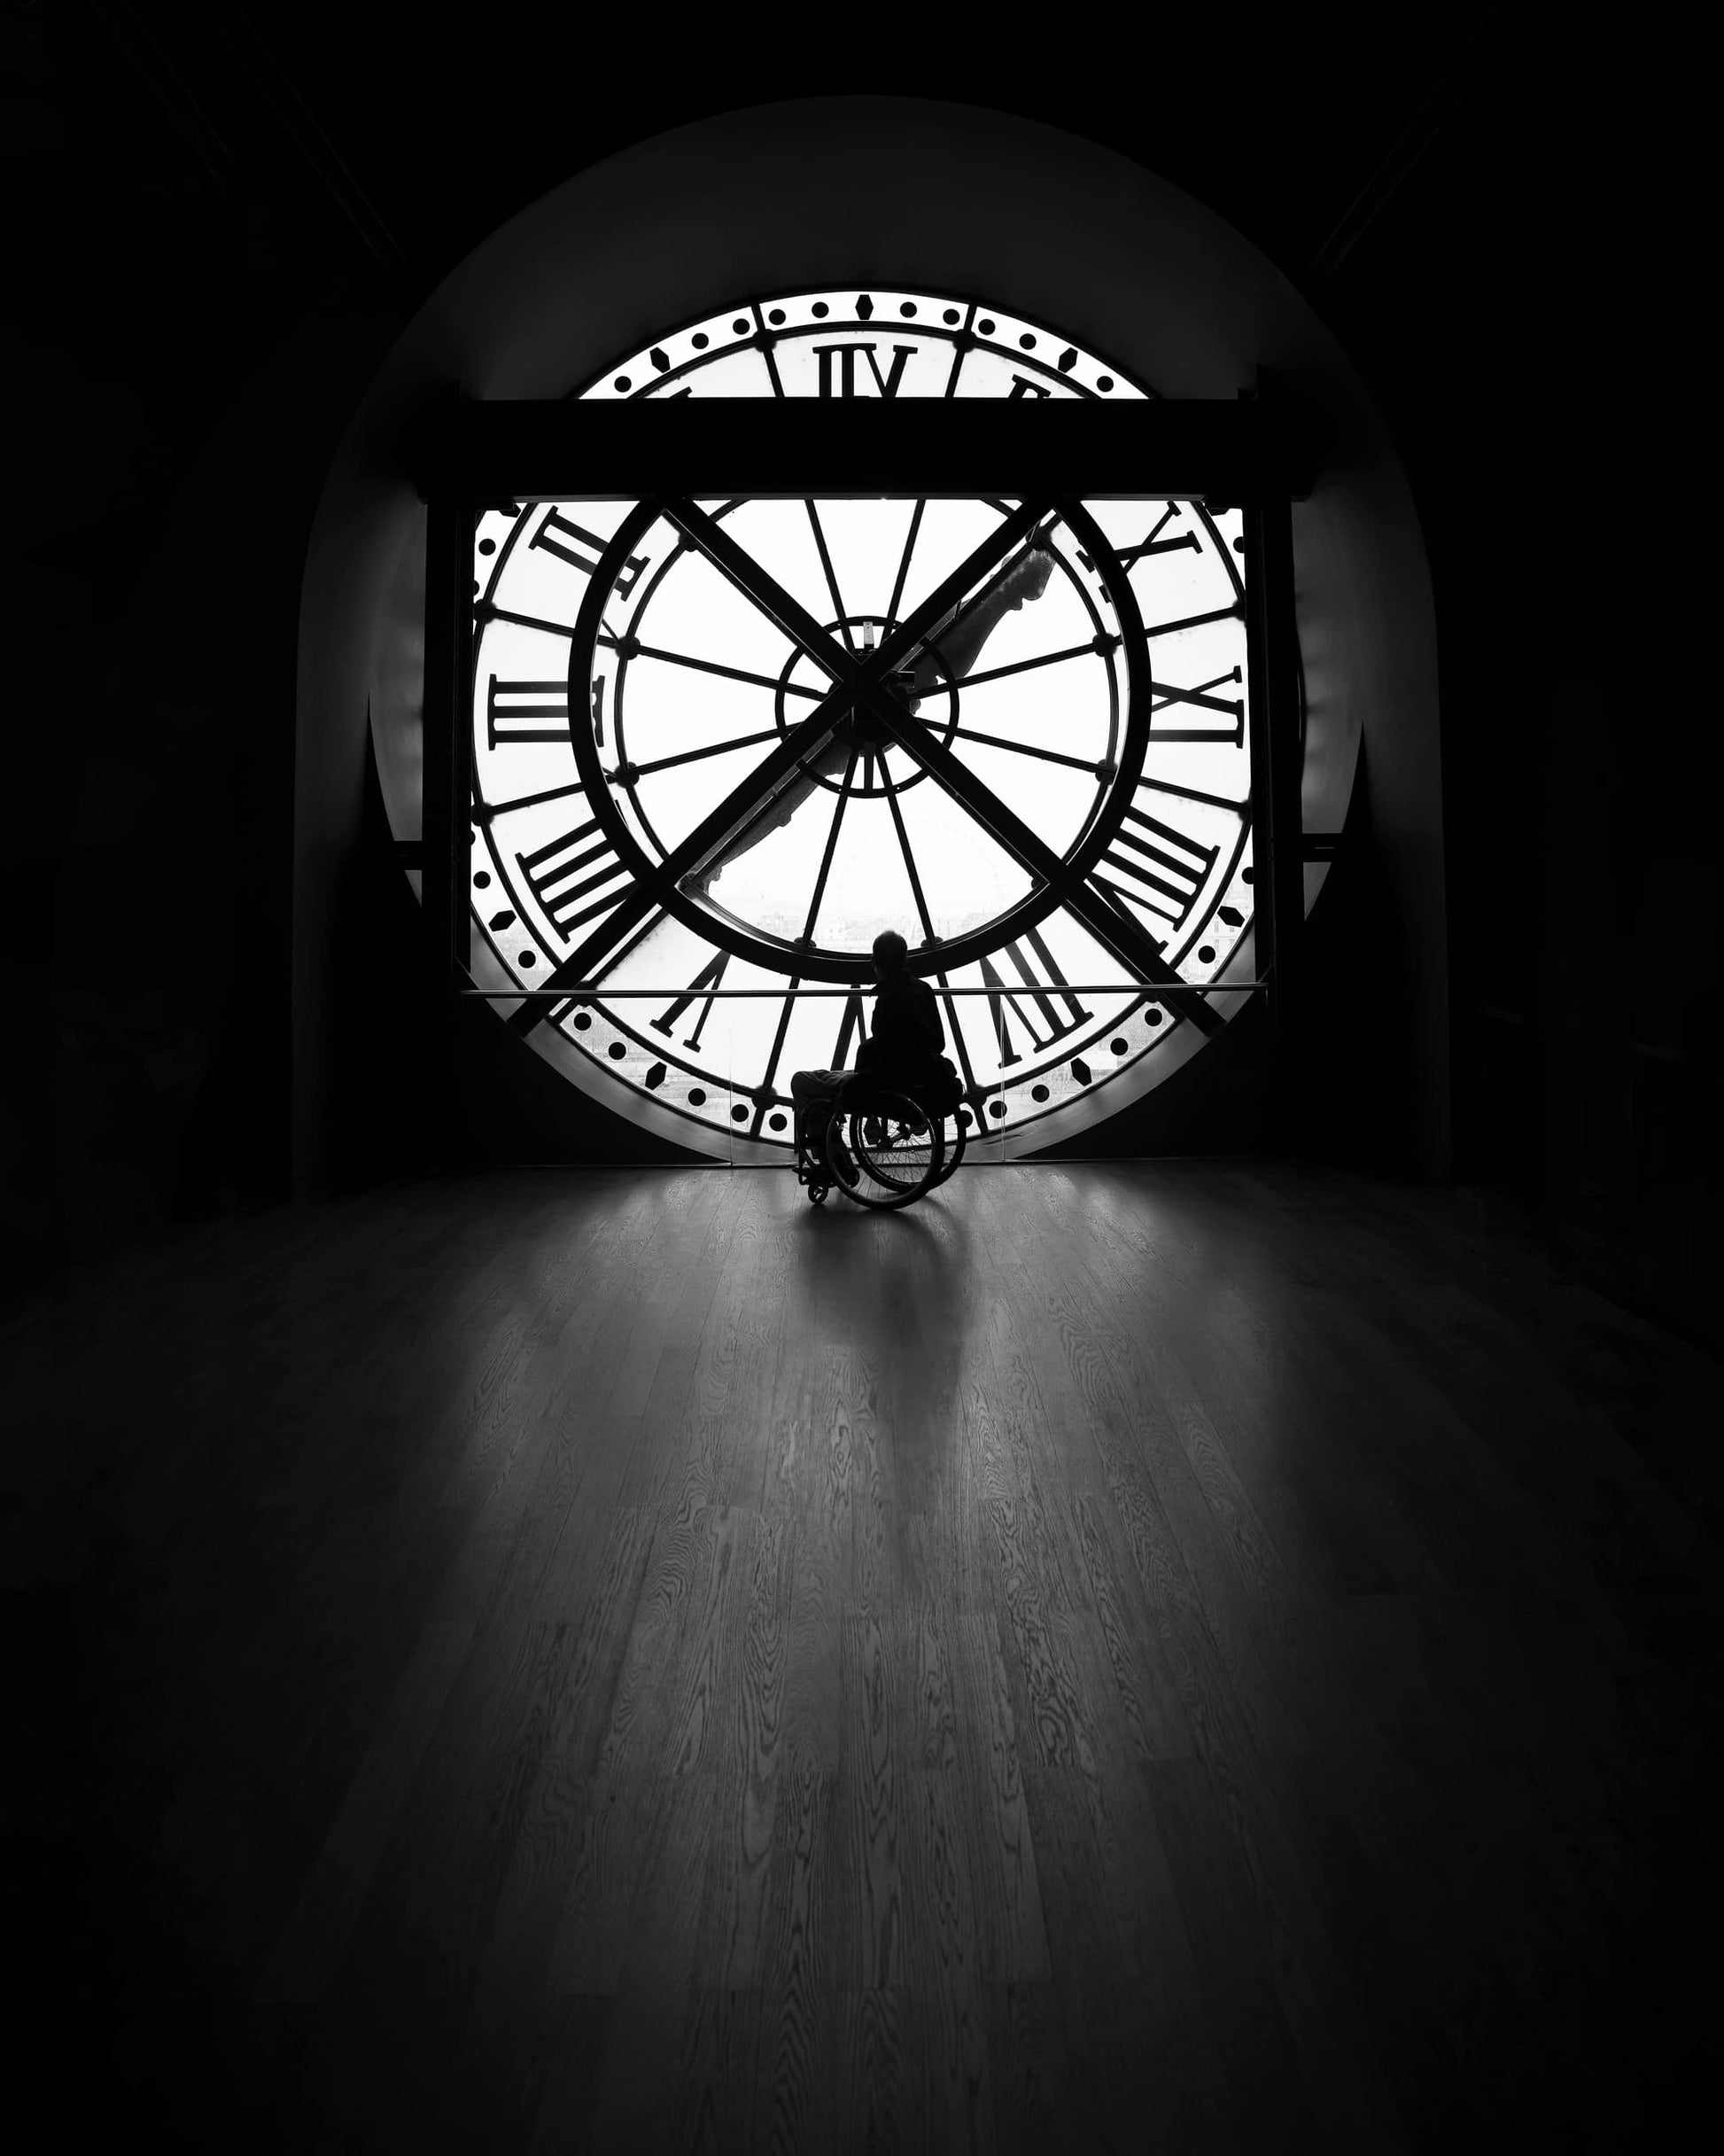 The artpiece 'Off a Free Spirit' by Nina Papiorek shows a single person in a wheelchair looking out of the clockwindow of the Musee D'Orsay. The artwork is completely in black and white.